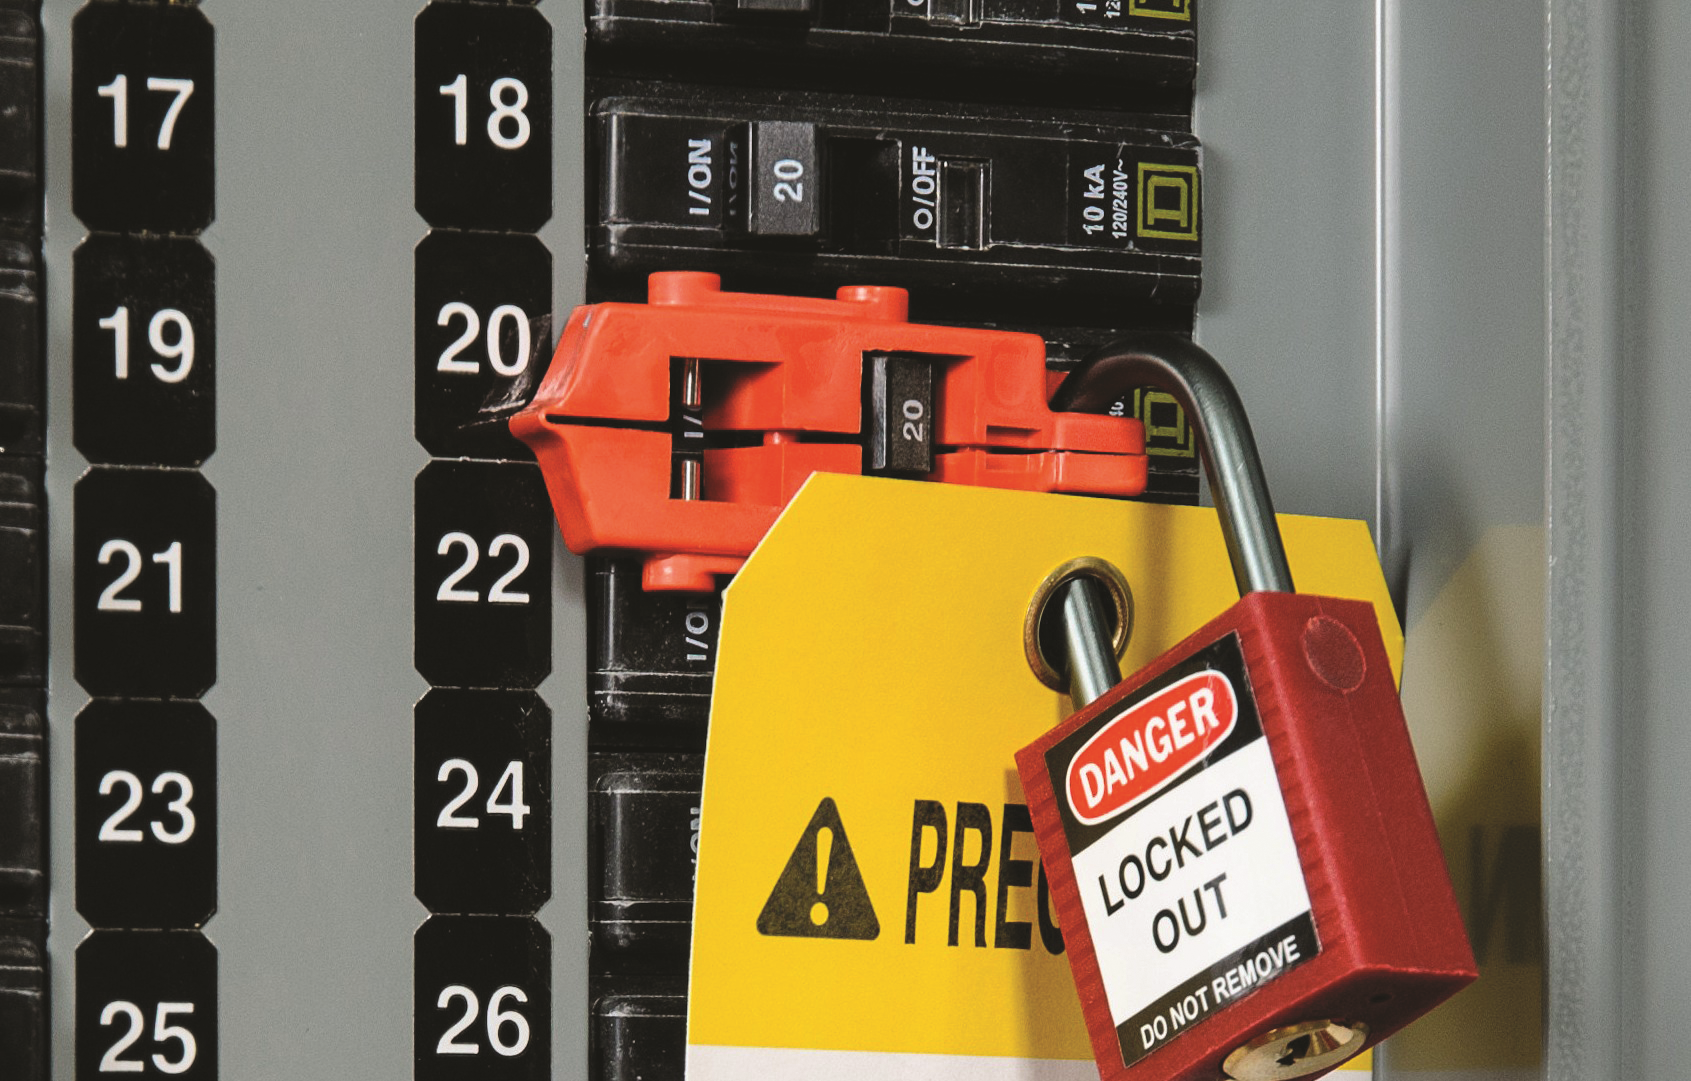 Ensuring Workplace Safety with Lockout-Tagout Procedures